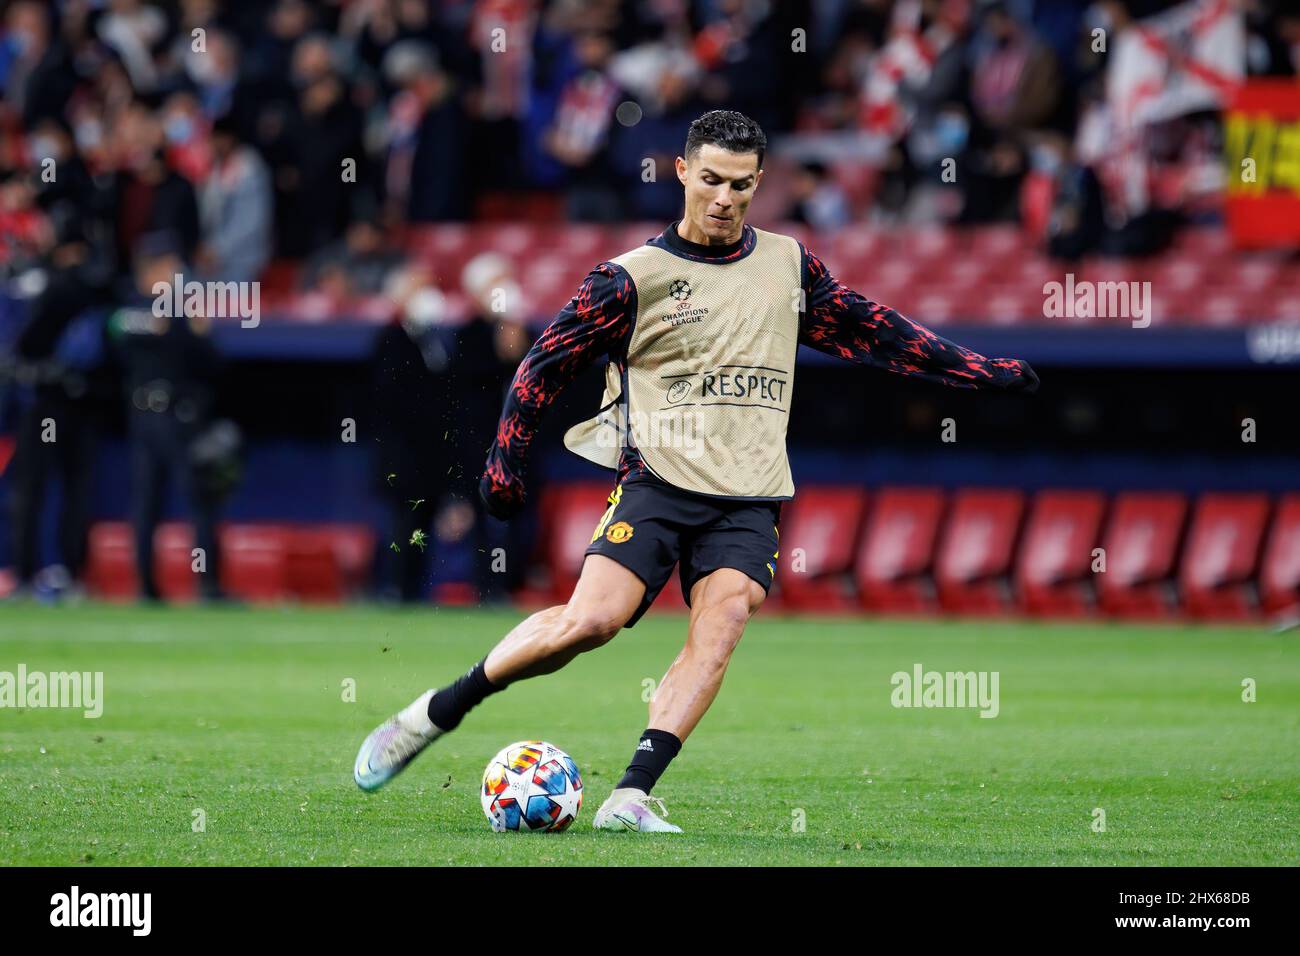 MADRID - FEB 23: Cristiano Ronaldo warms up prior to the Champions League match between Club Atletico de Madrid and Manchester United at the Metropoli Stock Photo